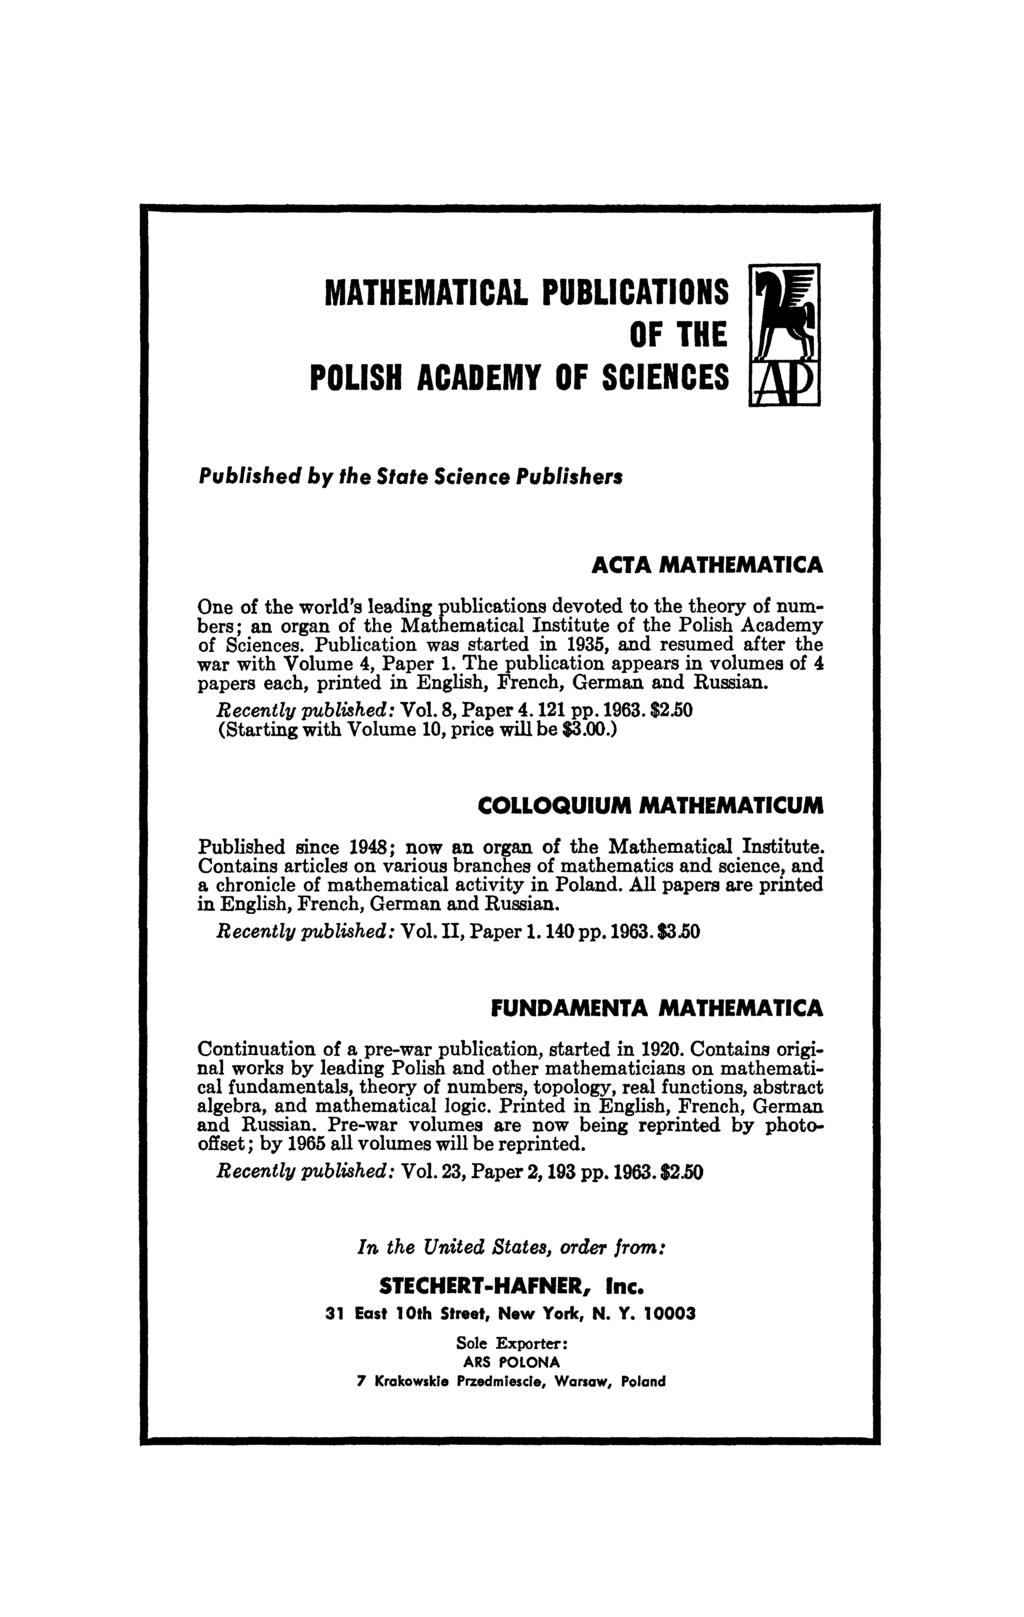 MATHEMATICAL PUBLICATIONS OF THE POLISH ACADEMY OF SCIENCES Published by the State Science Publishers ACTA MATHEMATICA One of the world's leading publications devoted to the theory of numbers; an